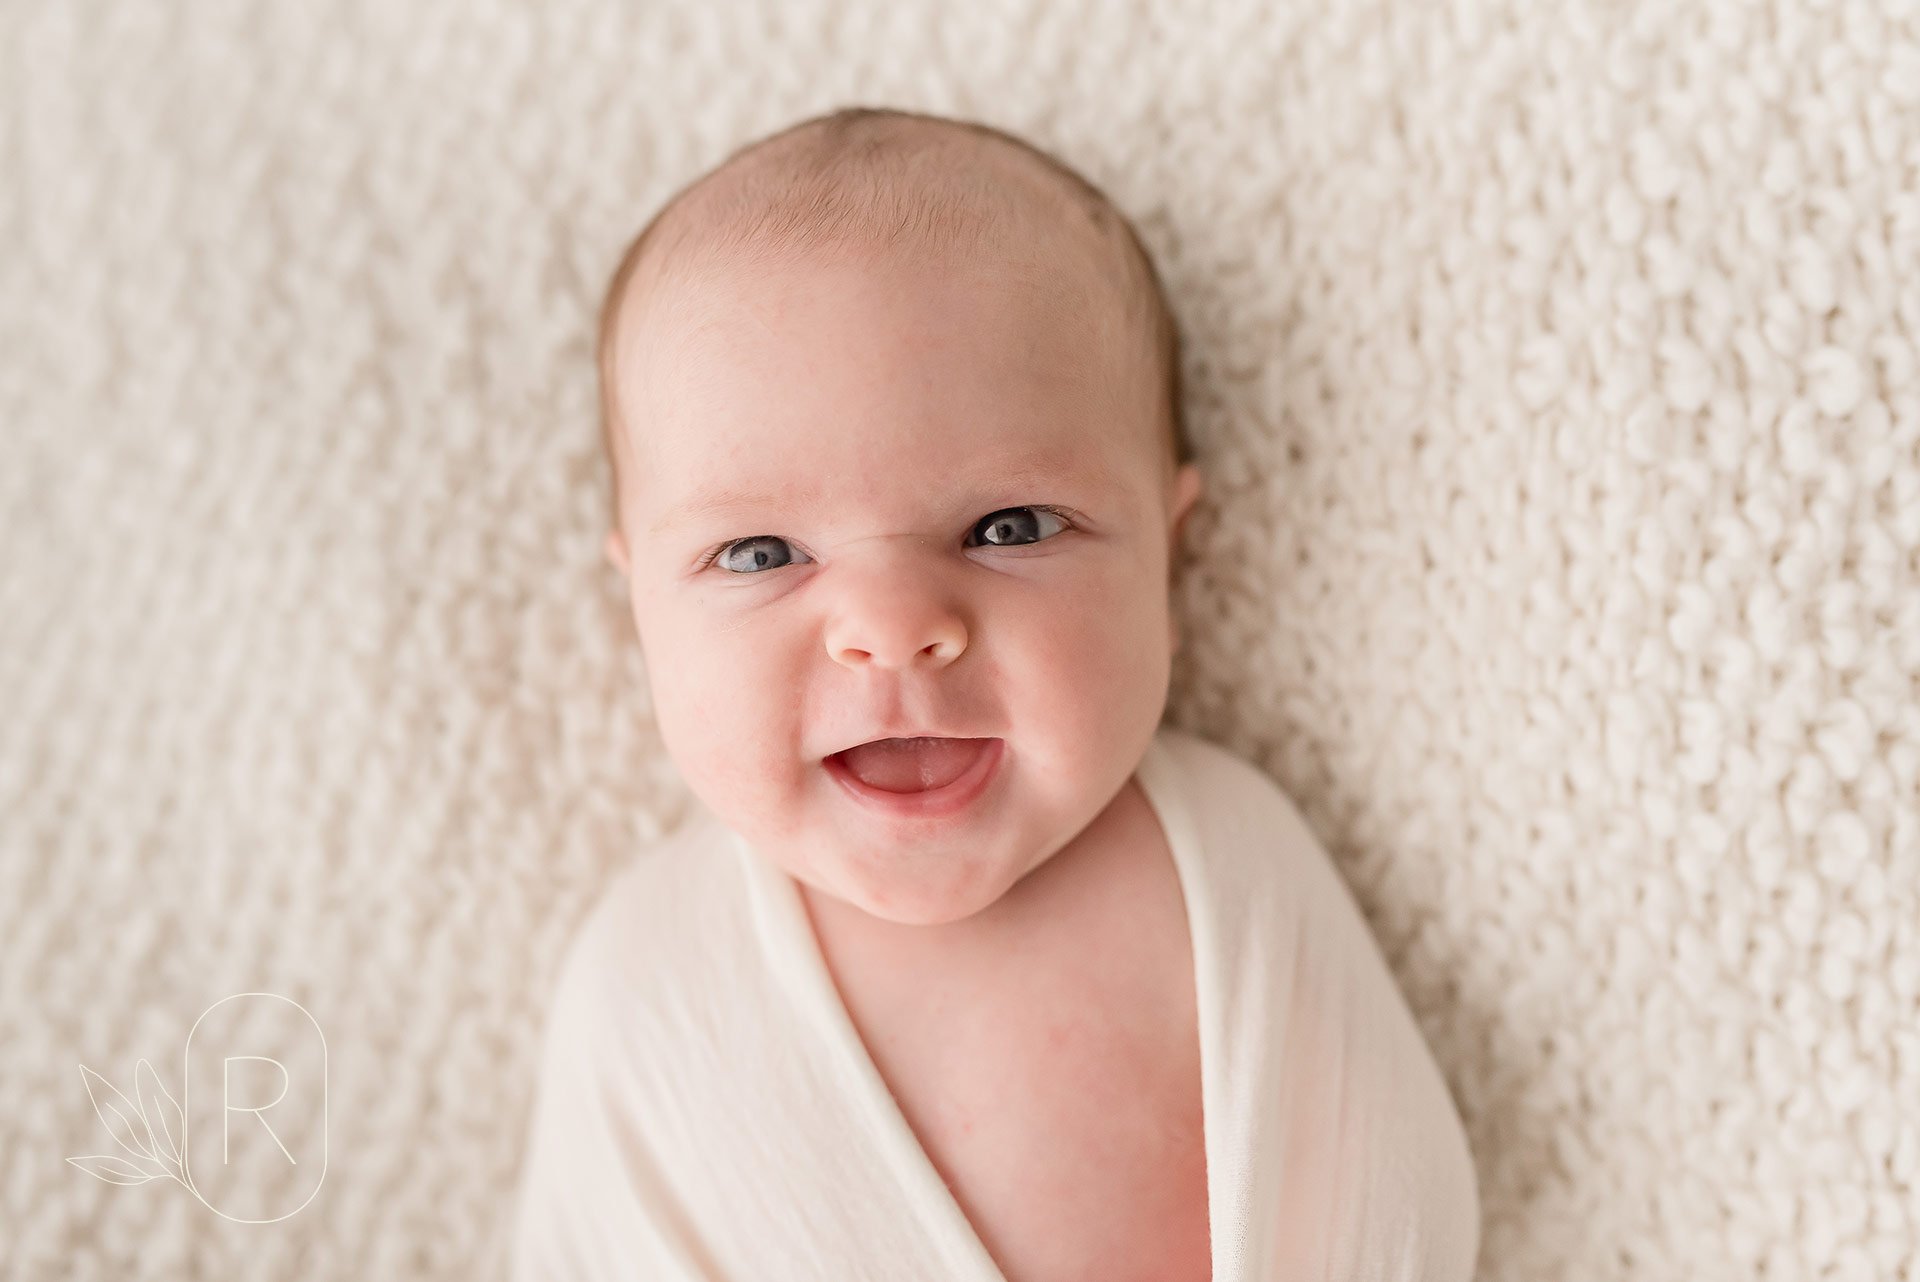 smiling-newborn-swaddled-baby-little-moments-family-photography-Reflections-niagara-ontario.jpeg